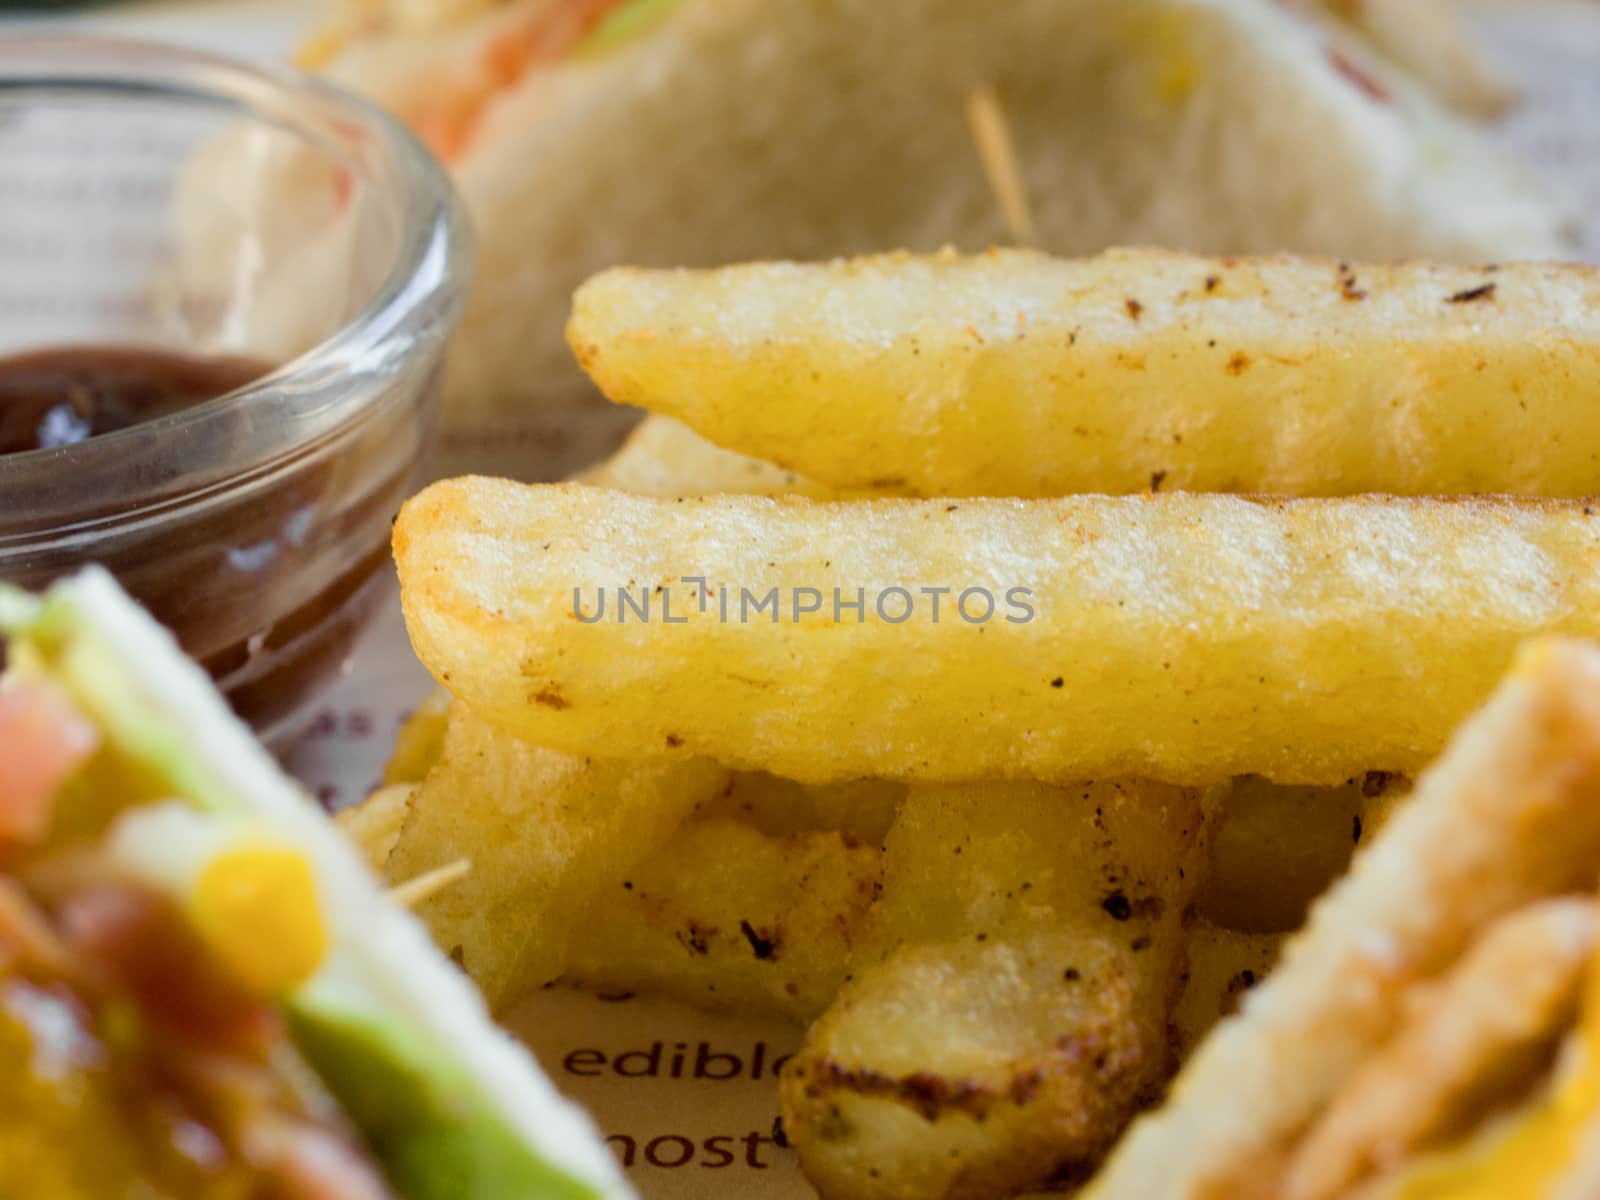 FRENCH FRIES, CHIPS, FRIES, FINGER CHIPS, FRENCH-FRIED POTATOES by PrettyTG